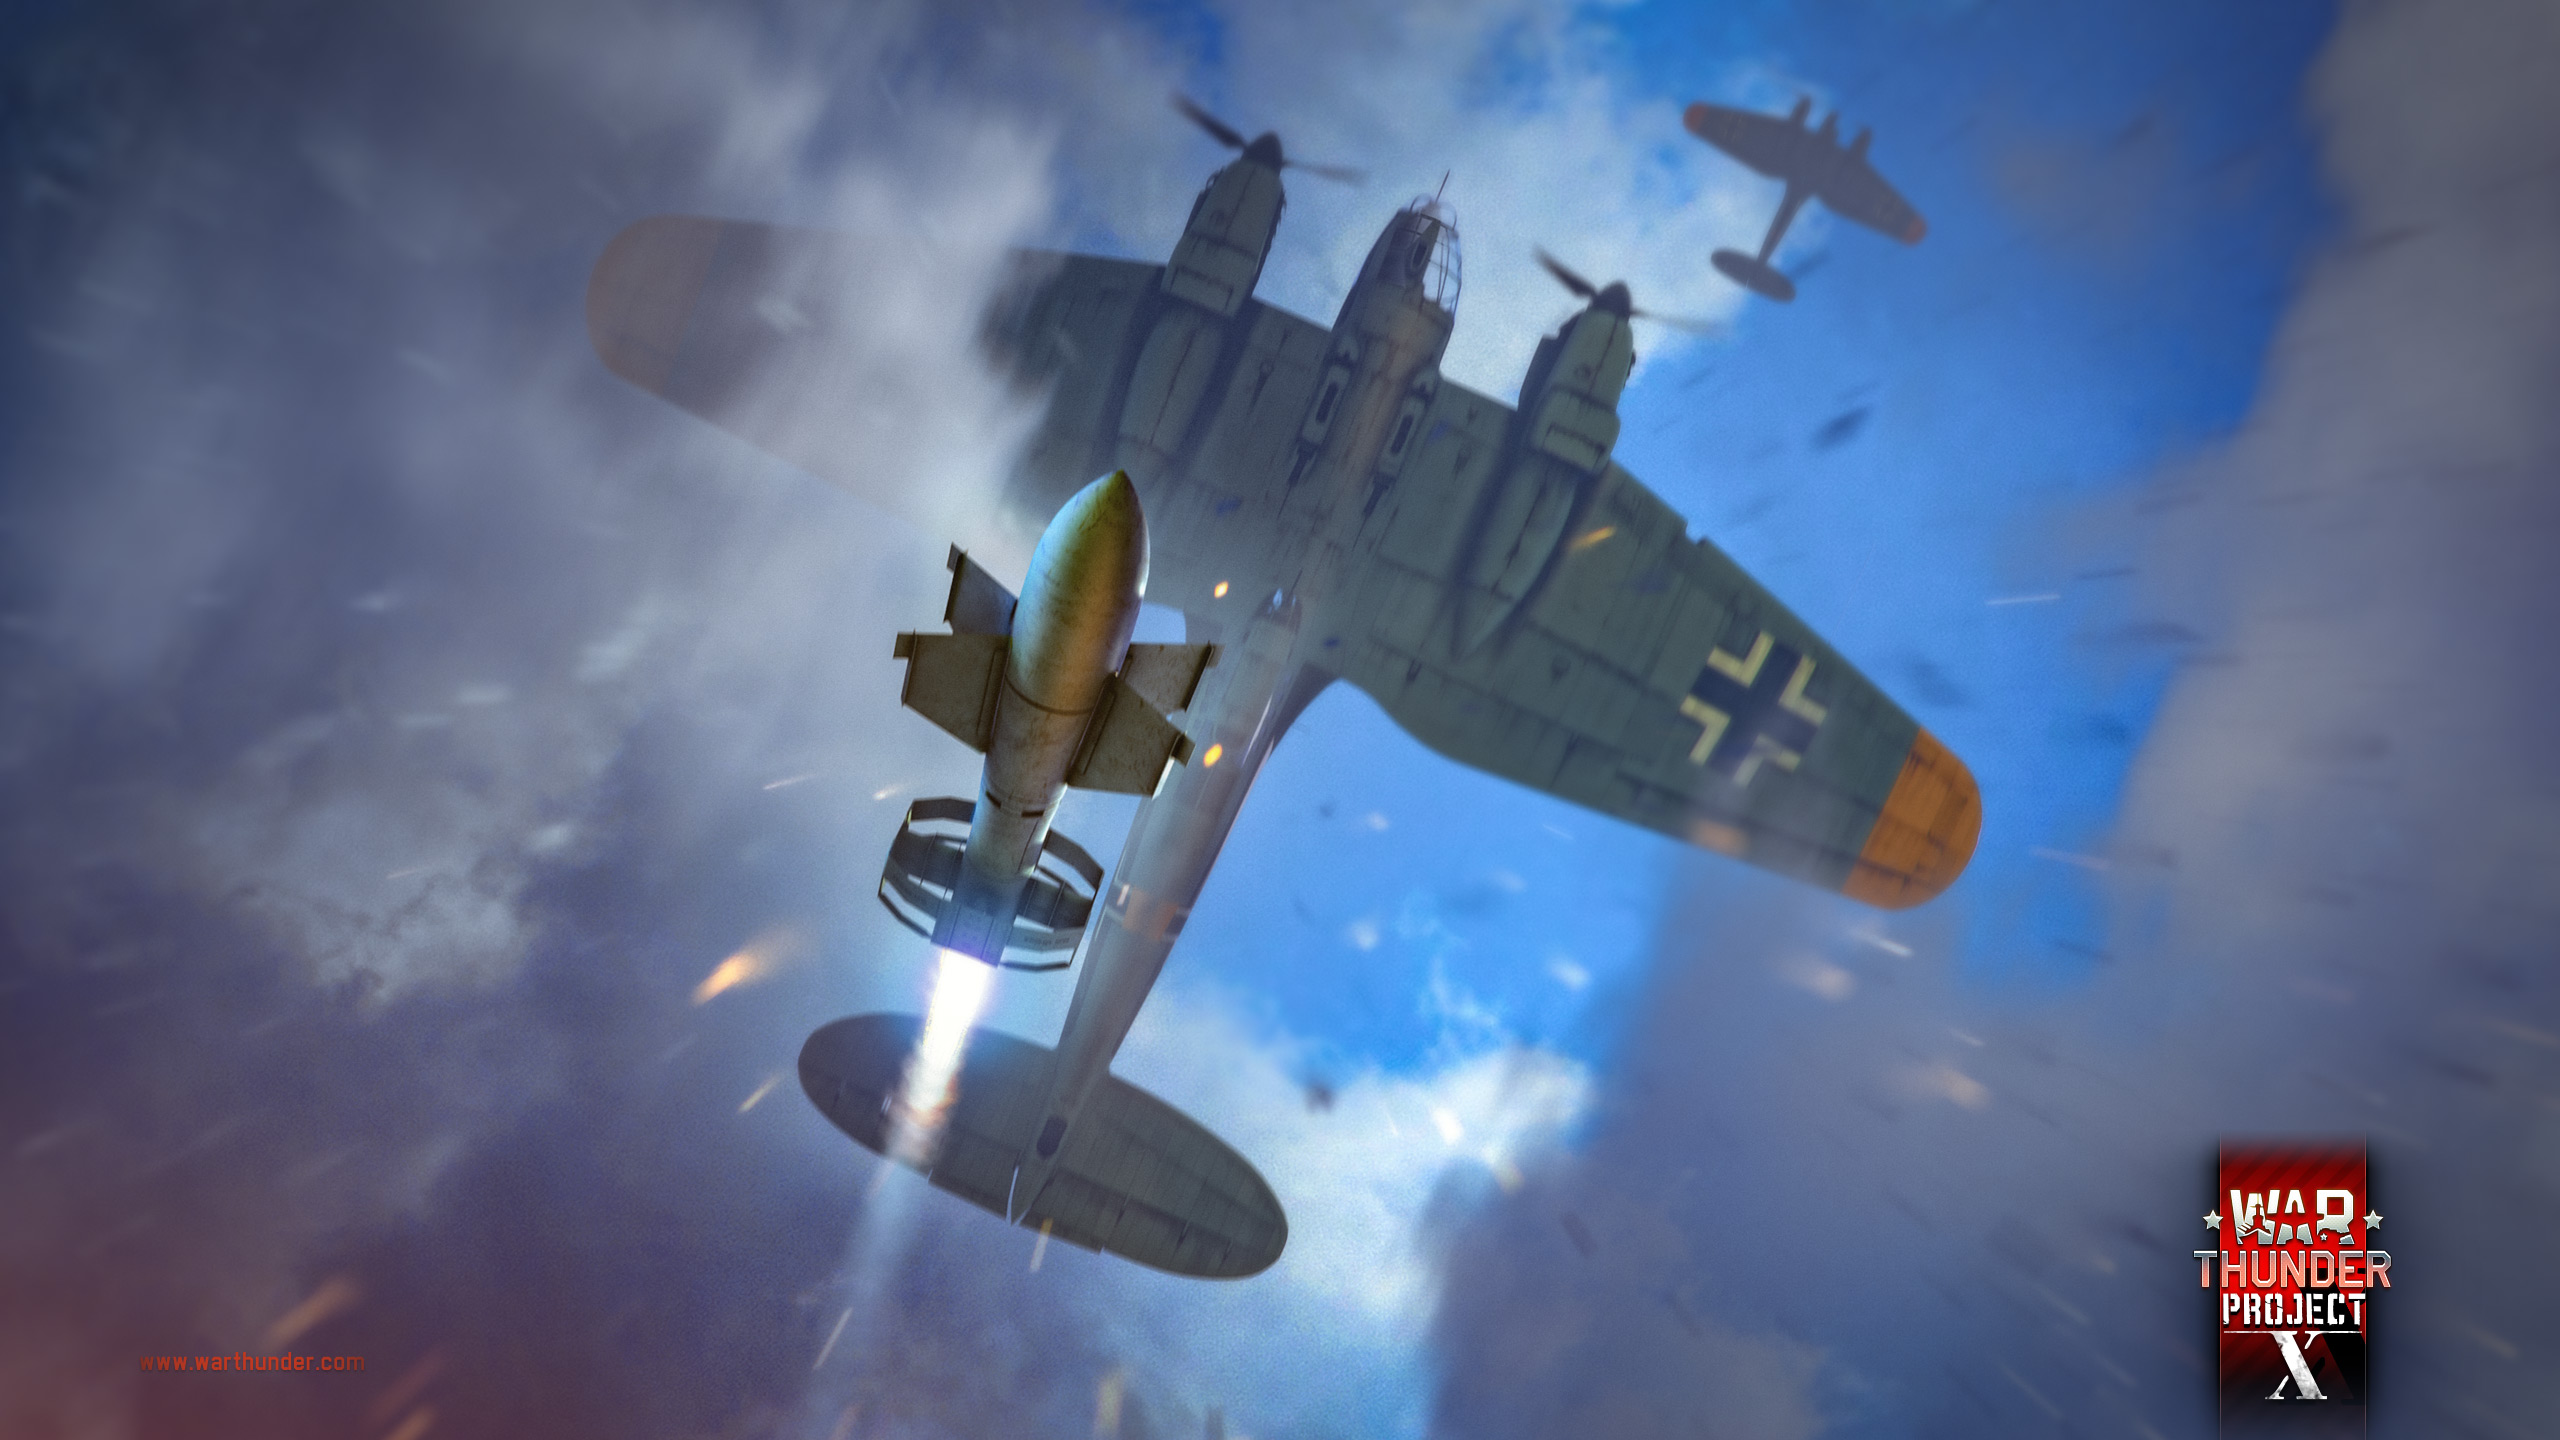 Planes German Army World War Ii Games Posters 2560x1440